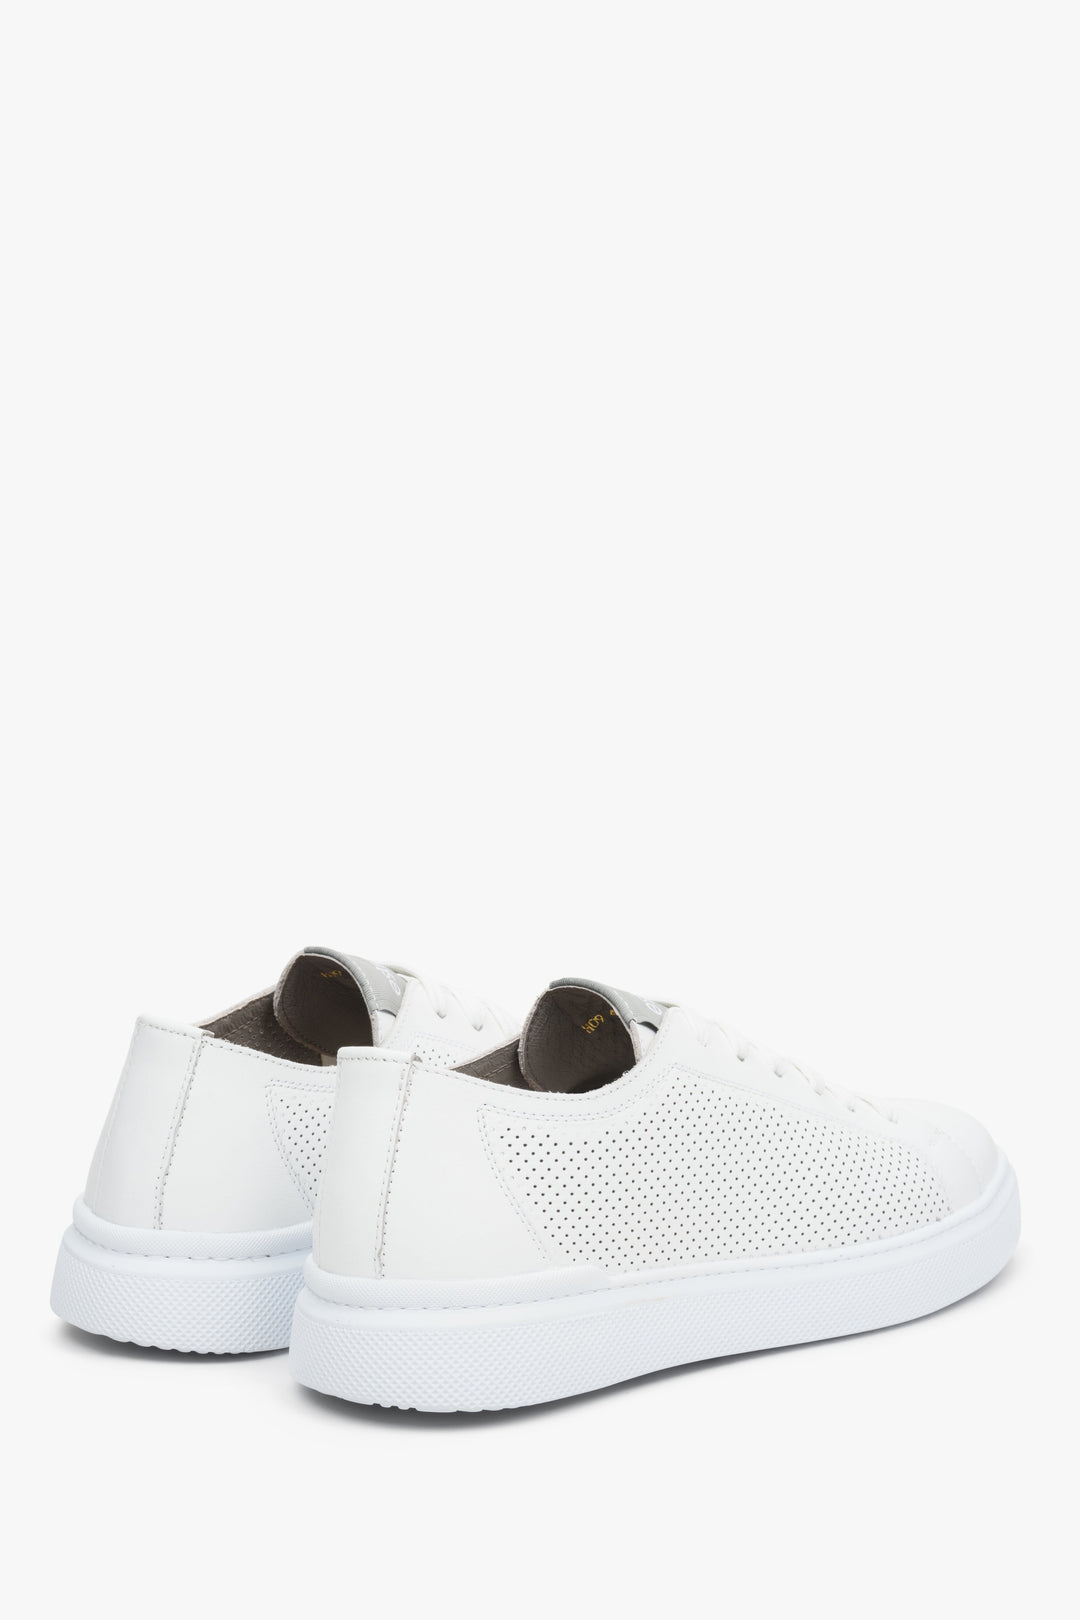 Men's white perforated leather sneakers by Estro - close-up on heel counter and sideline.